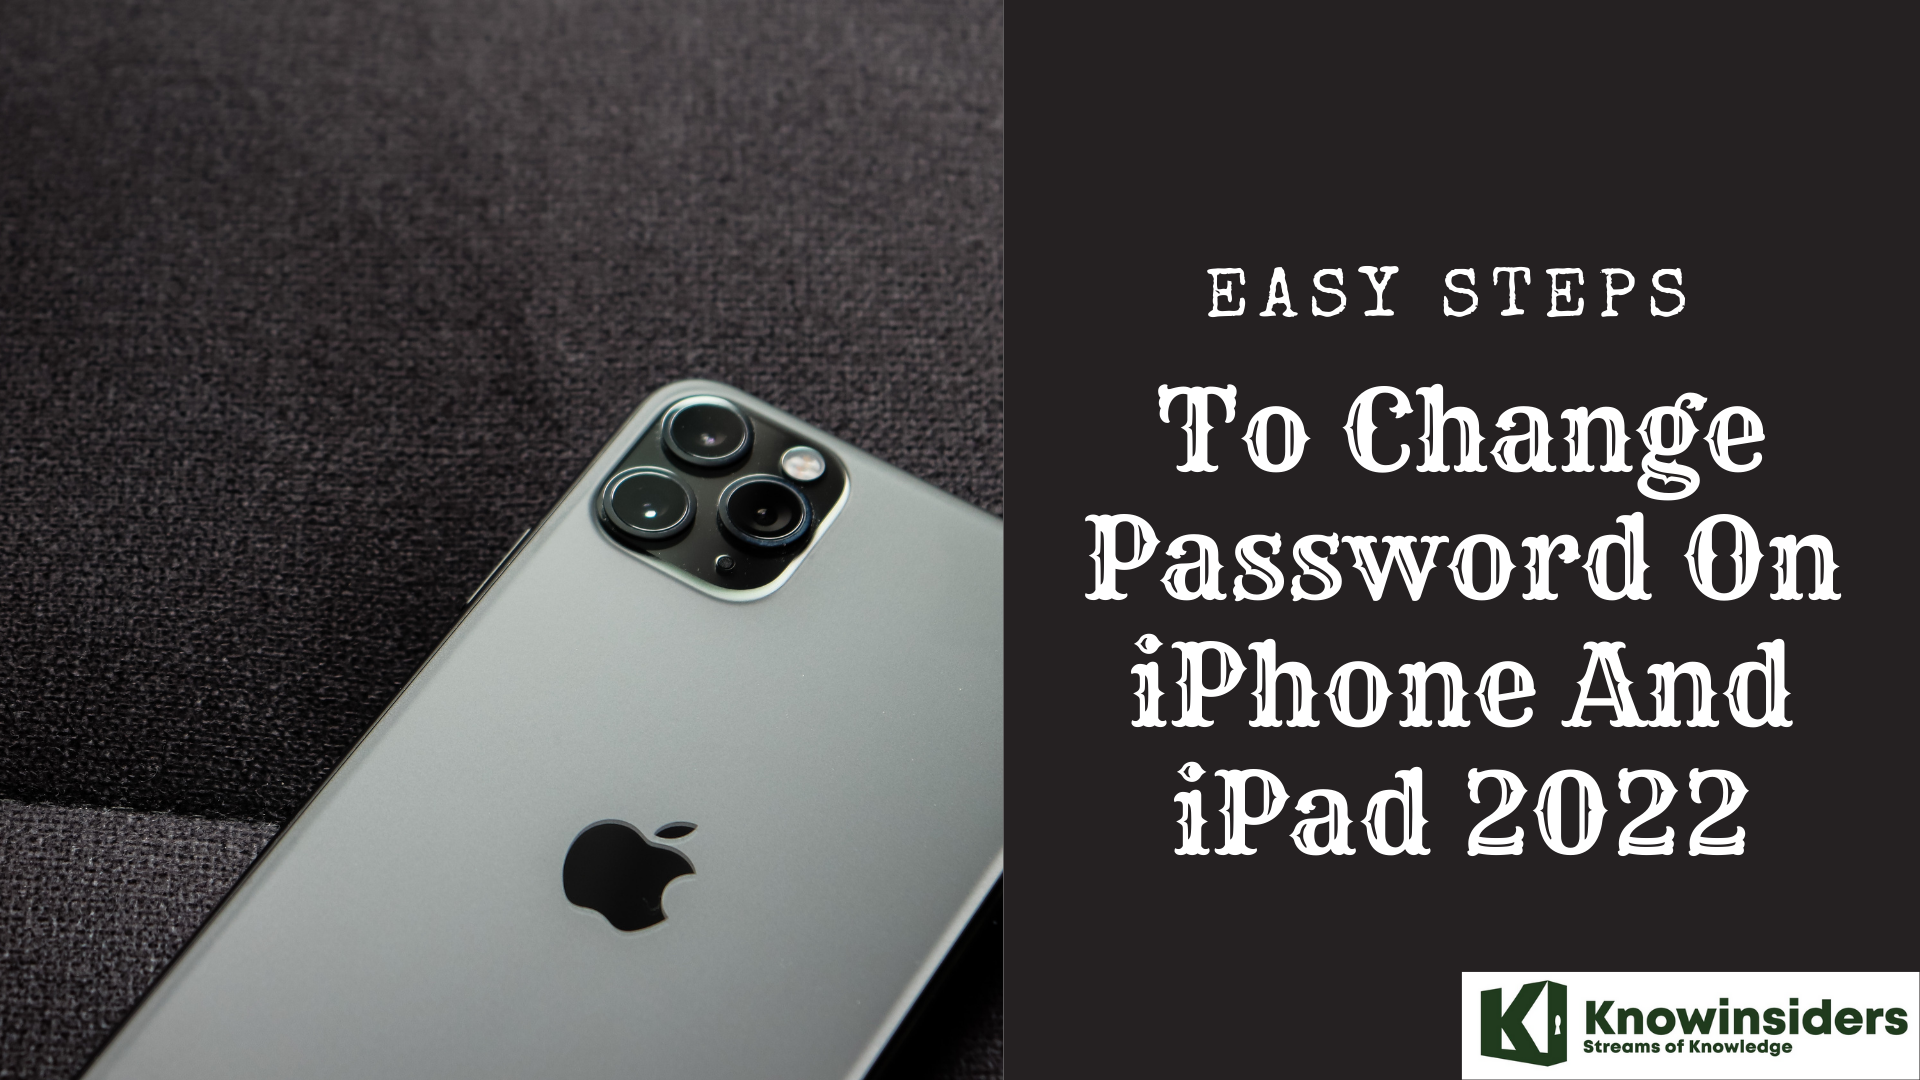 Easy Steps To Change Password On iPhone And iPad 2022